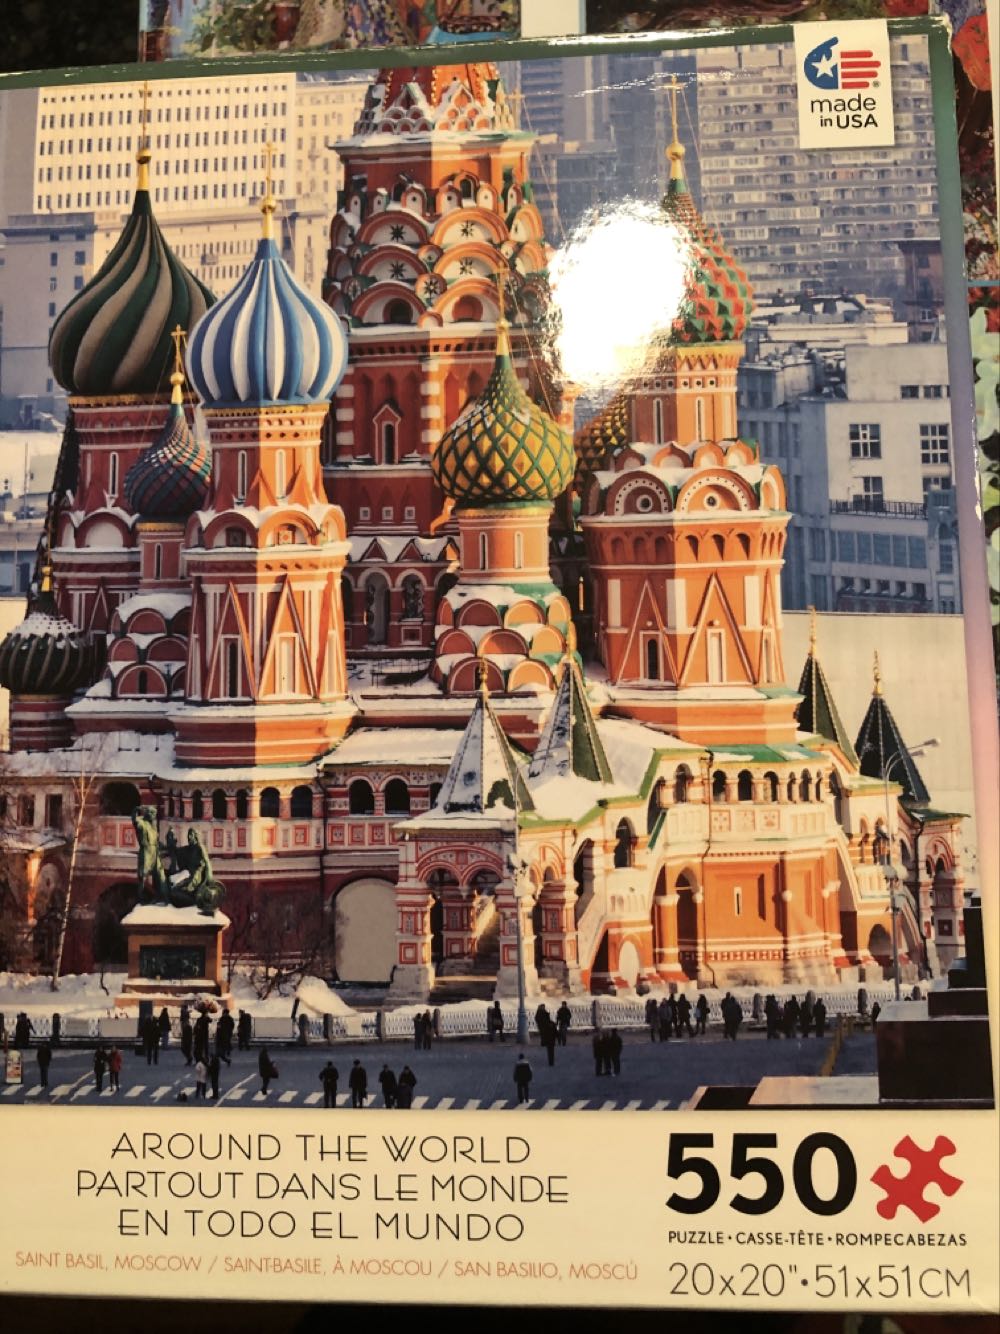 Saint basil, Moscow - Ceaco puzzle collectible [Barcode 021081023962] - Main Image 1